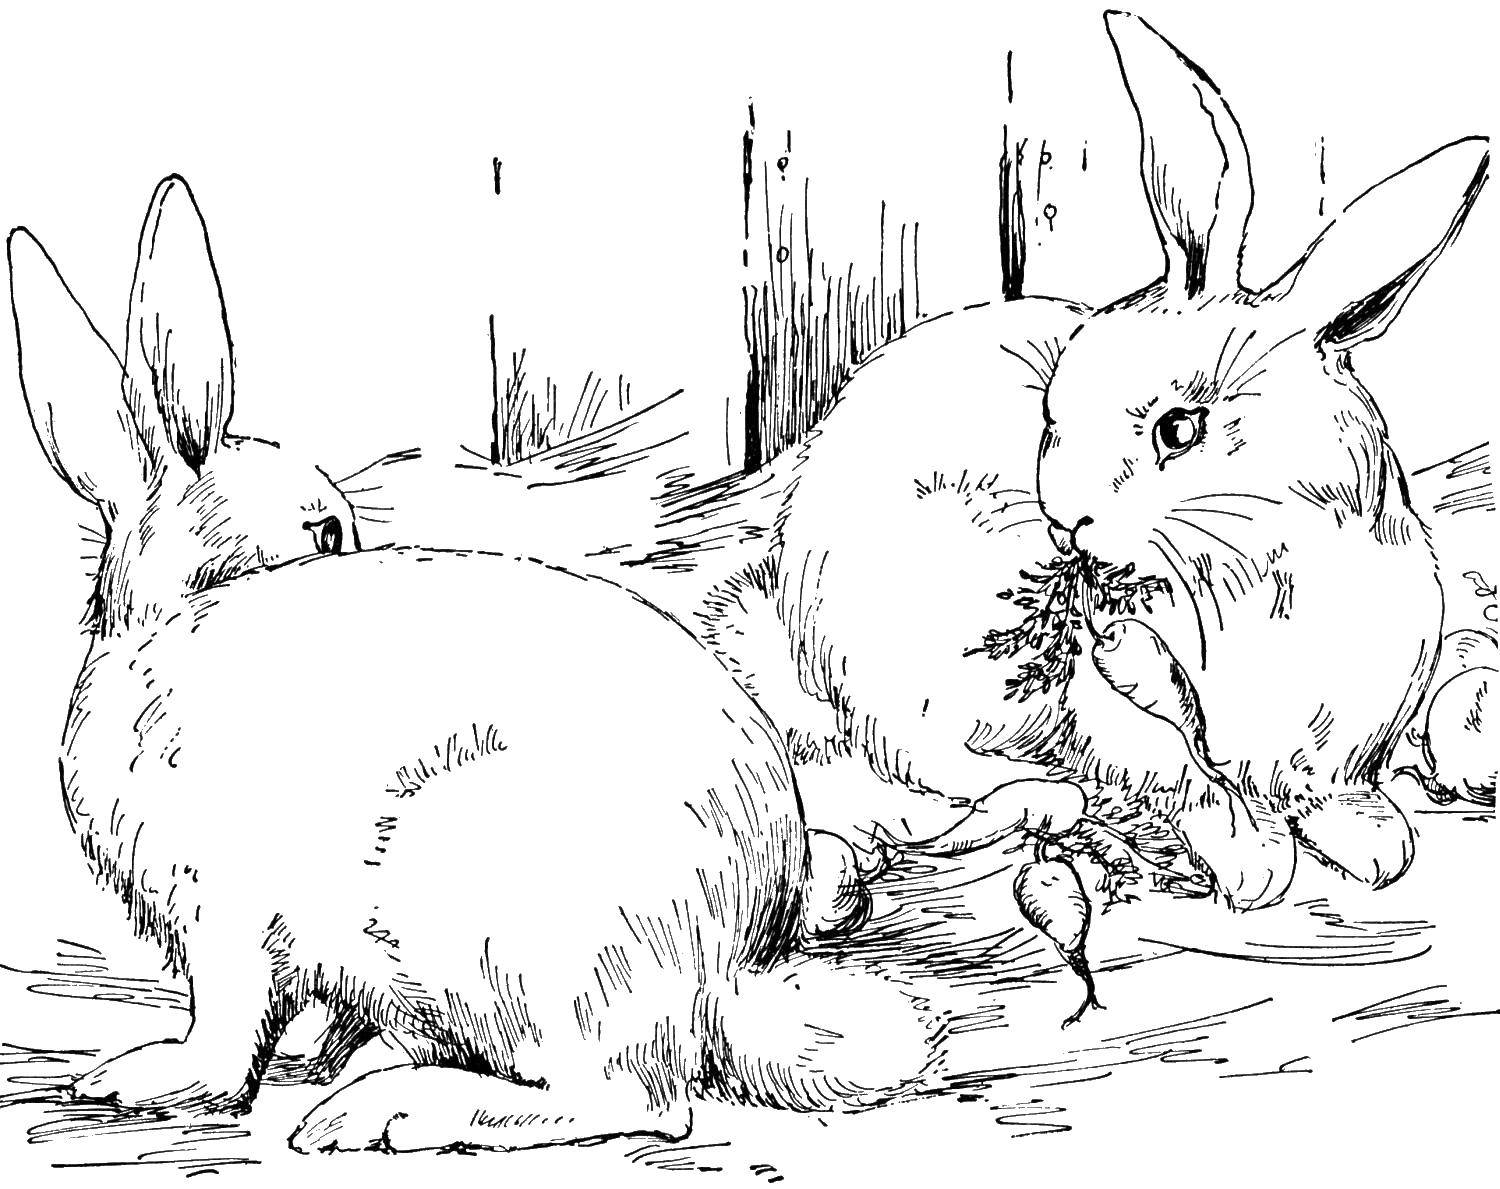 Coloring Two rabbits eating carrots. Category the rabbit. Tags:  rabbit, carrot.